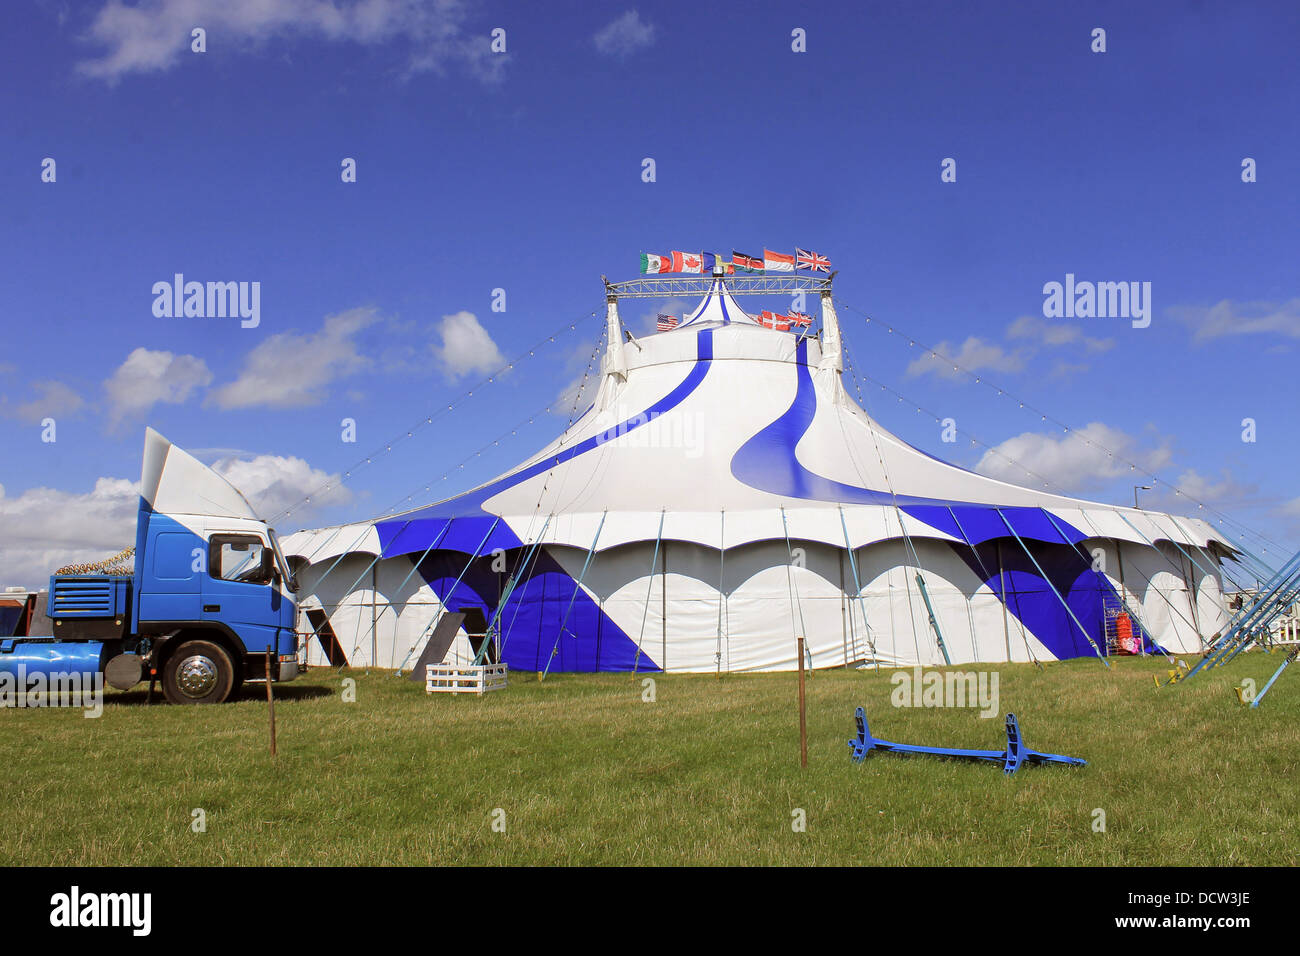 Circus big top tent and truck, blue and white. Stock Photo